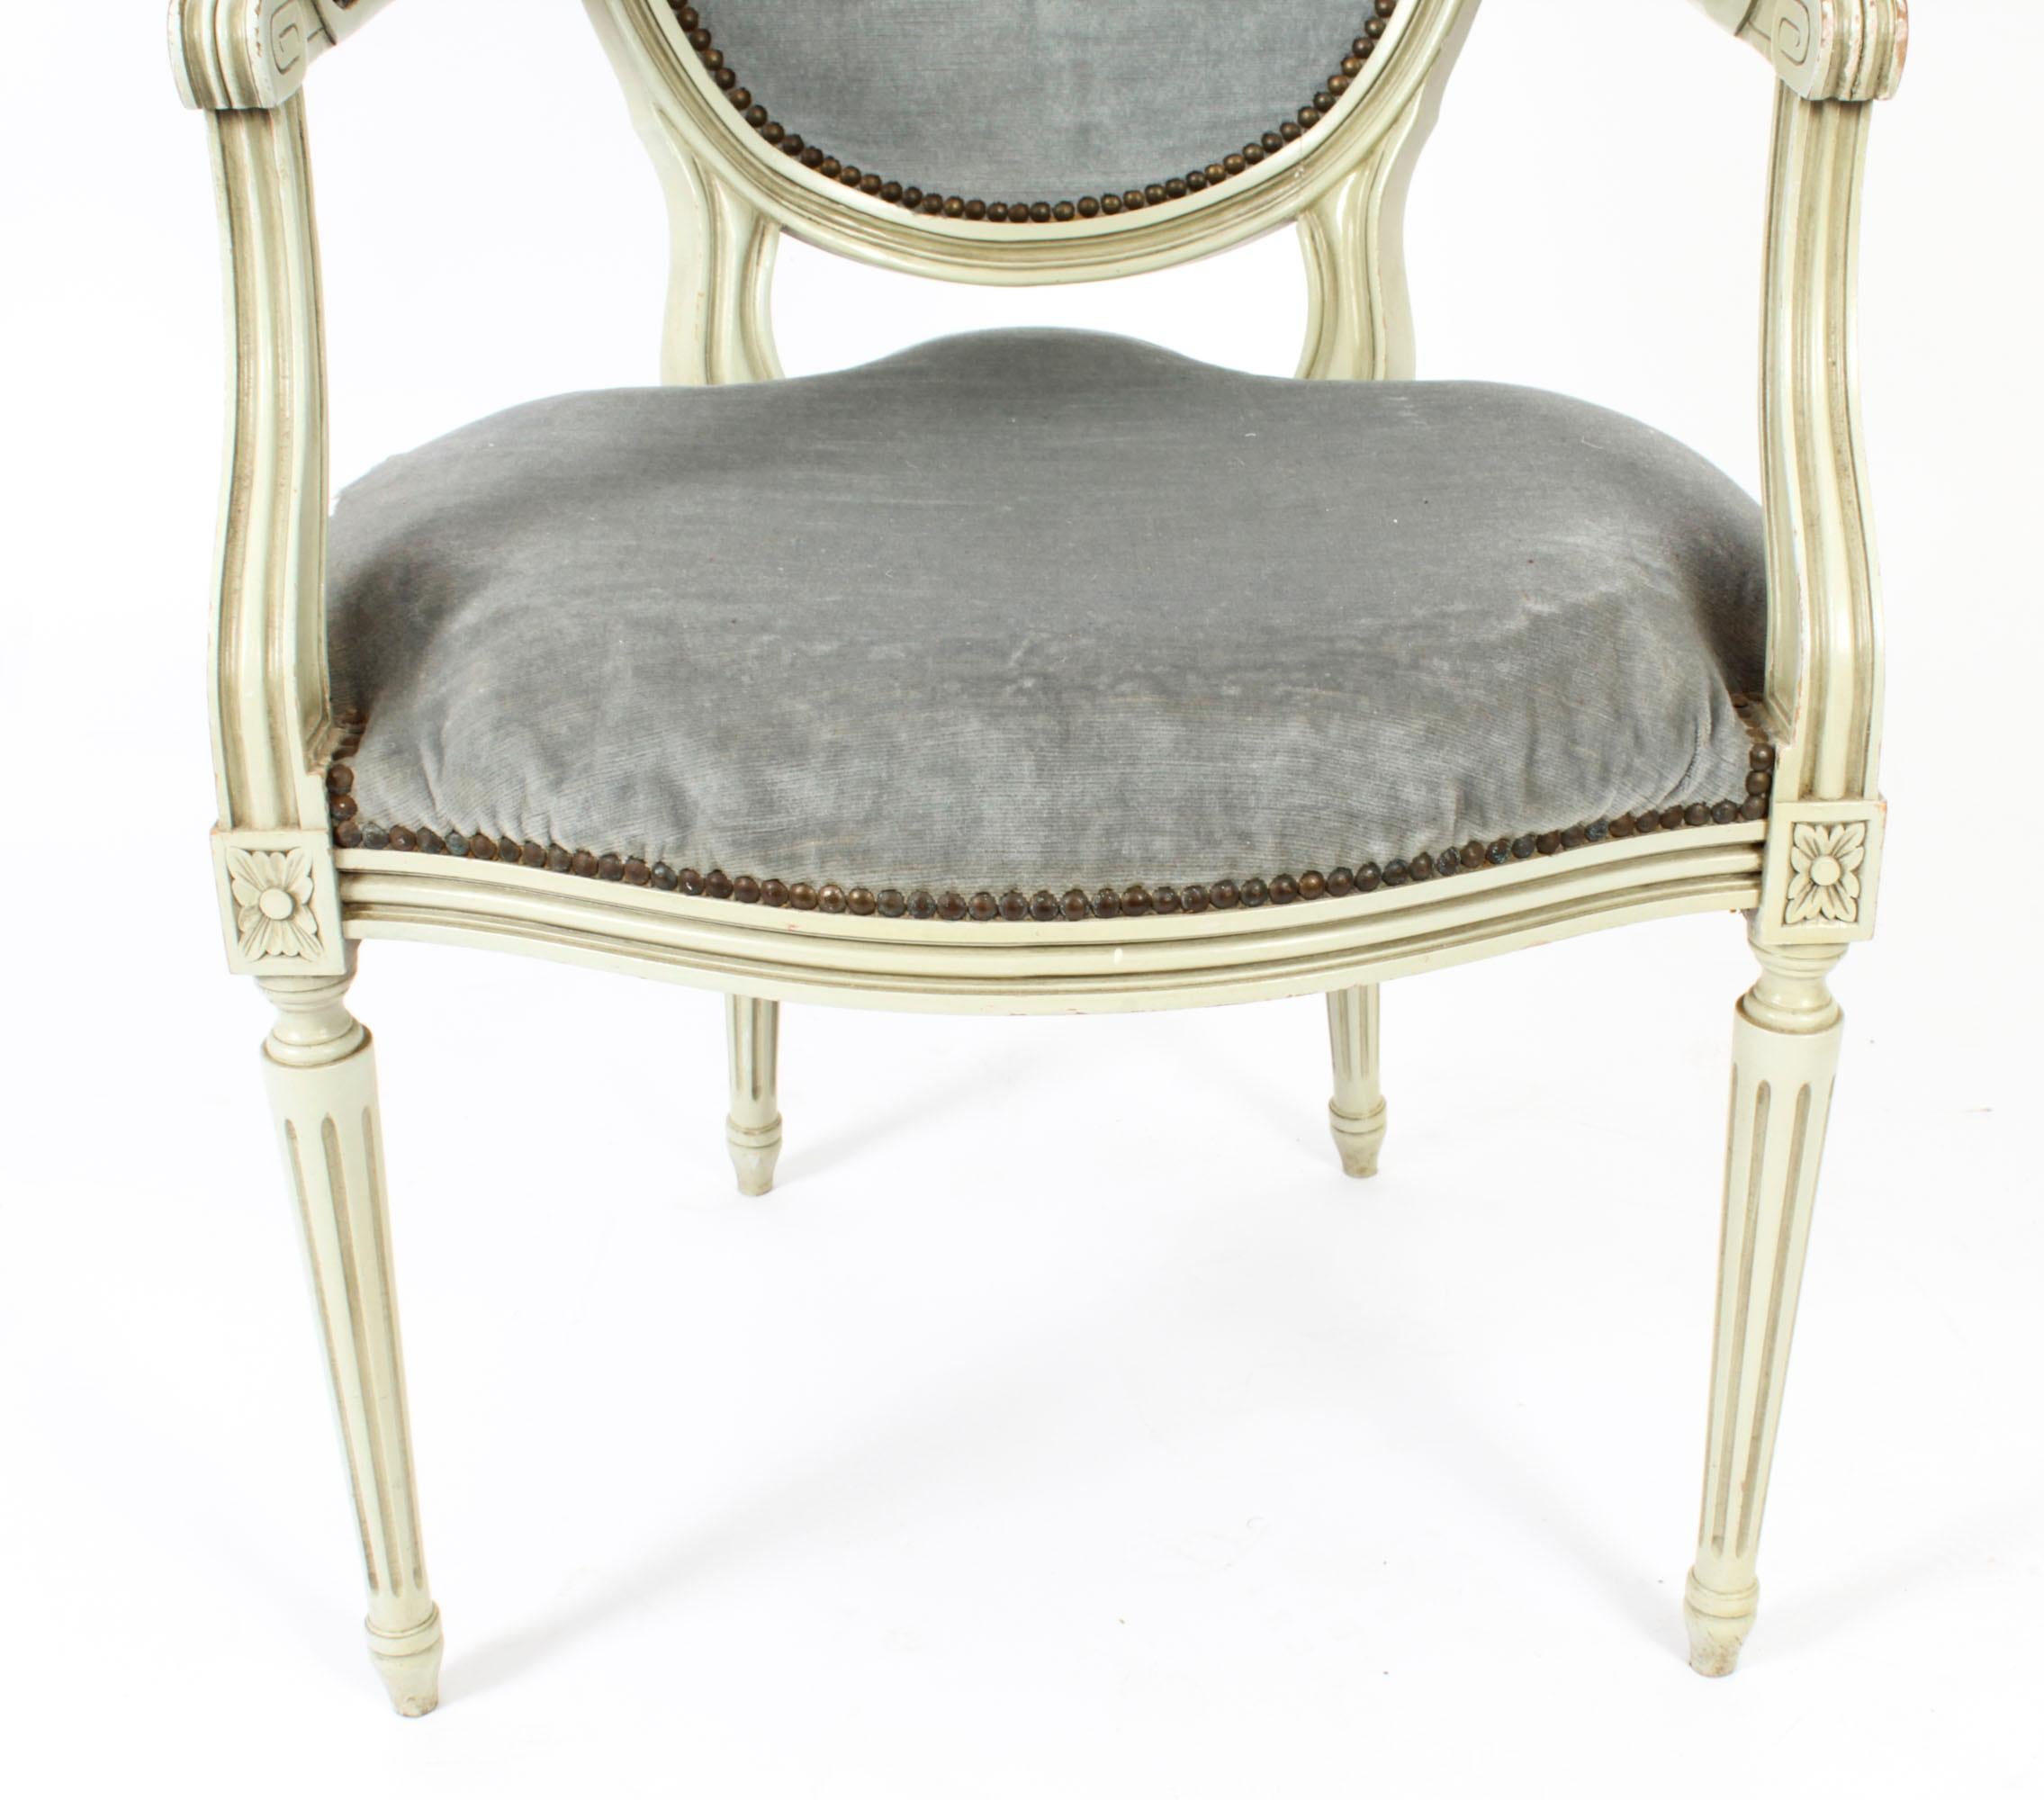 Antique Pair French Louis XVI Revival Painted Armchairs, Early 20th Century For Sale 3